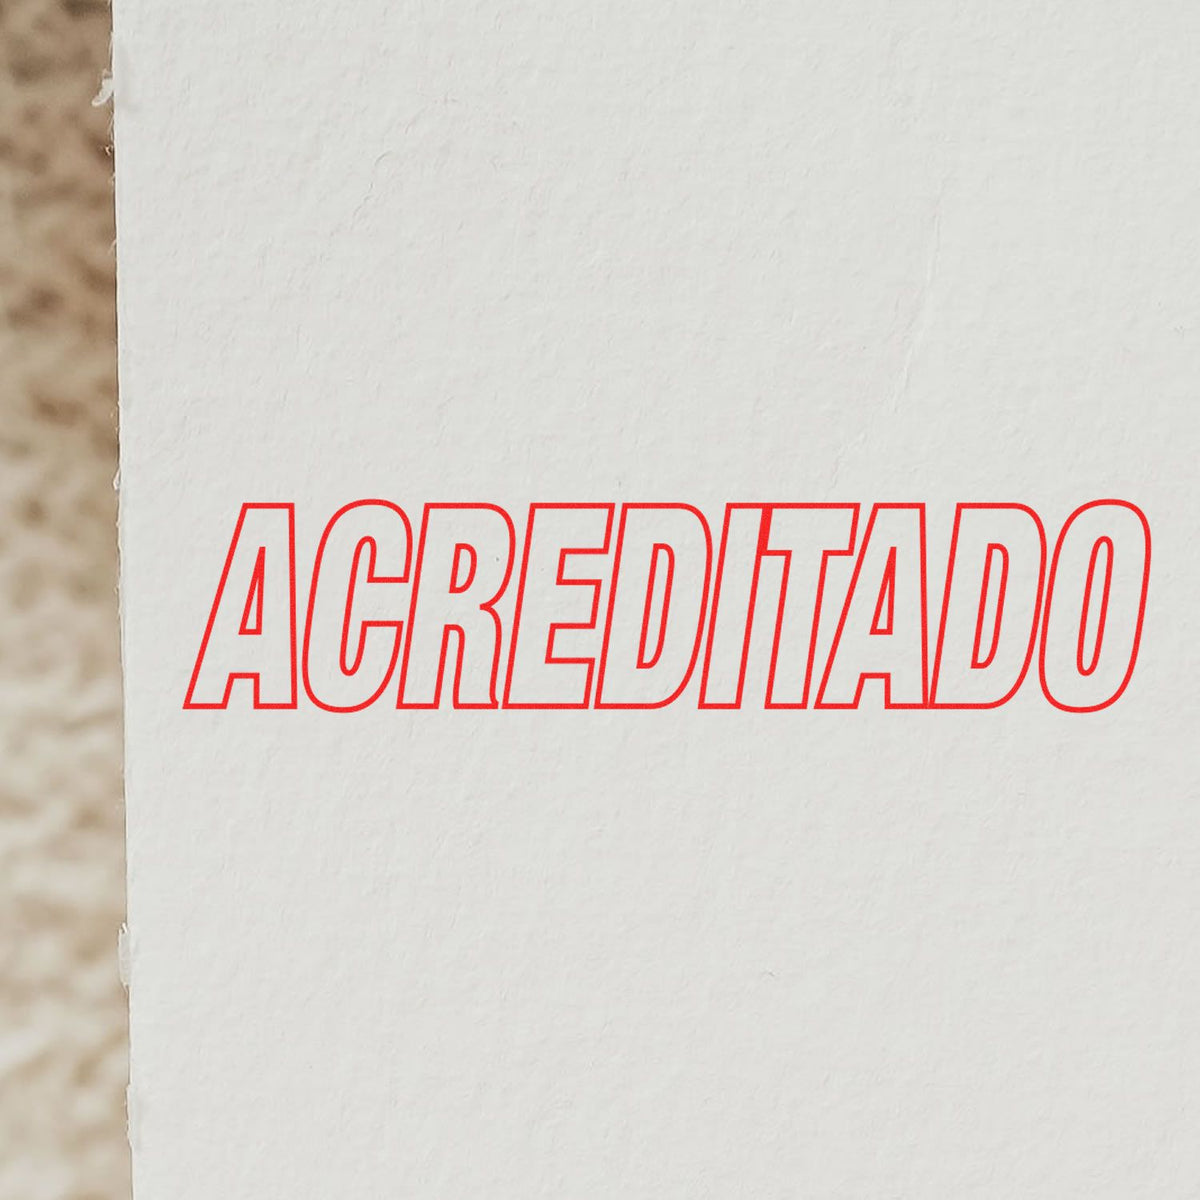 Large Acreditado Rubber Stamp In Use Photo